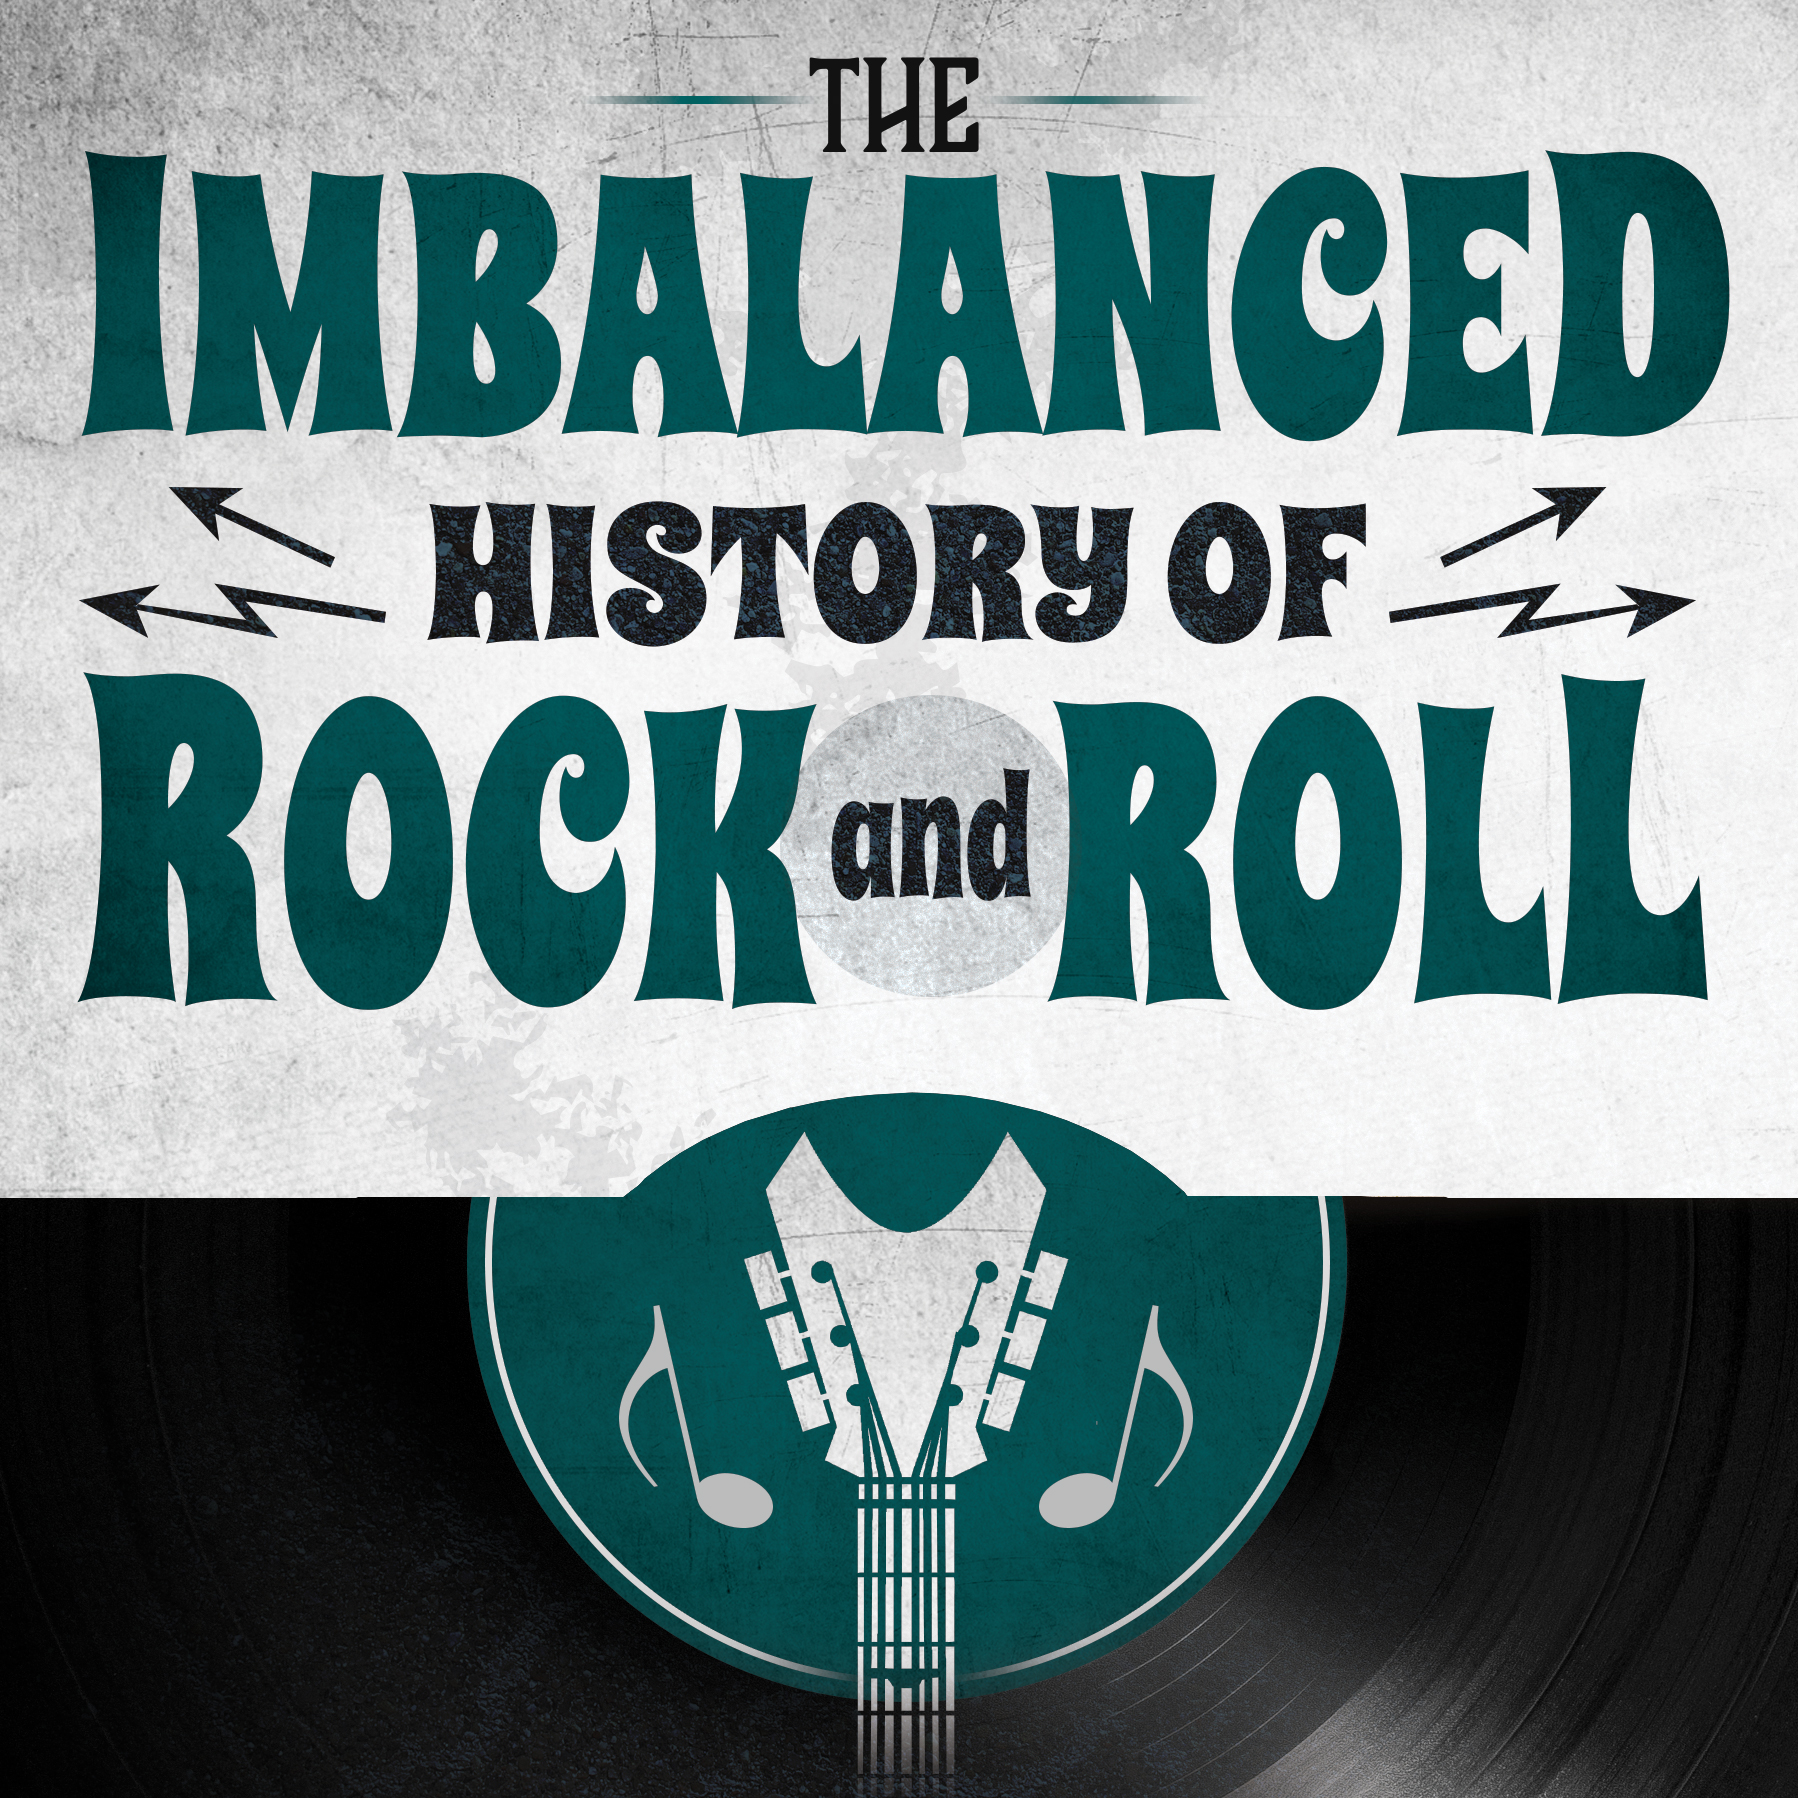 Logo of the podcast "The Imbalanced History of Rock and Roll